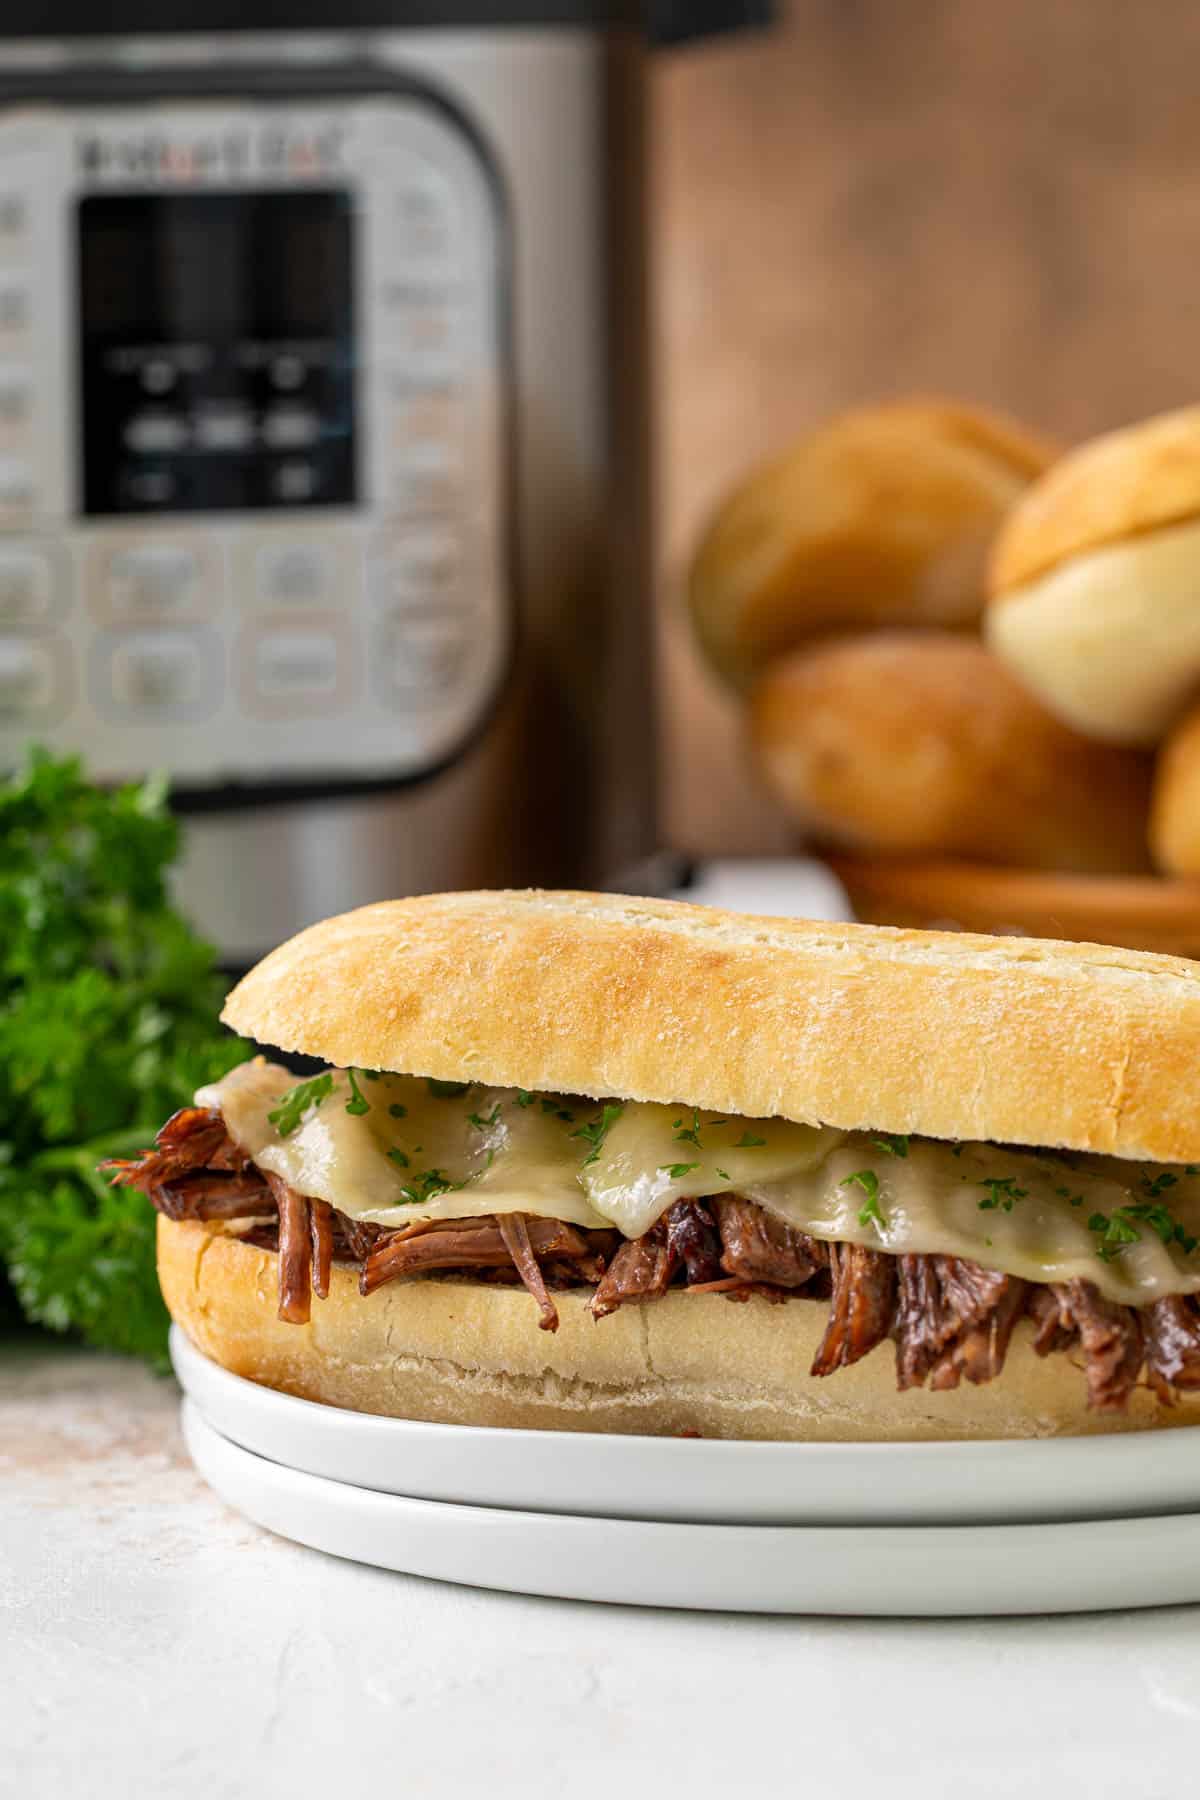 Front view of a French Dip sandwich on a white plate. An instant pot pressure cooker is in the background.